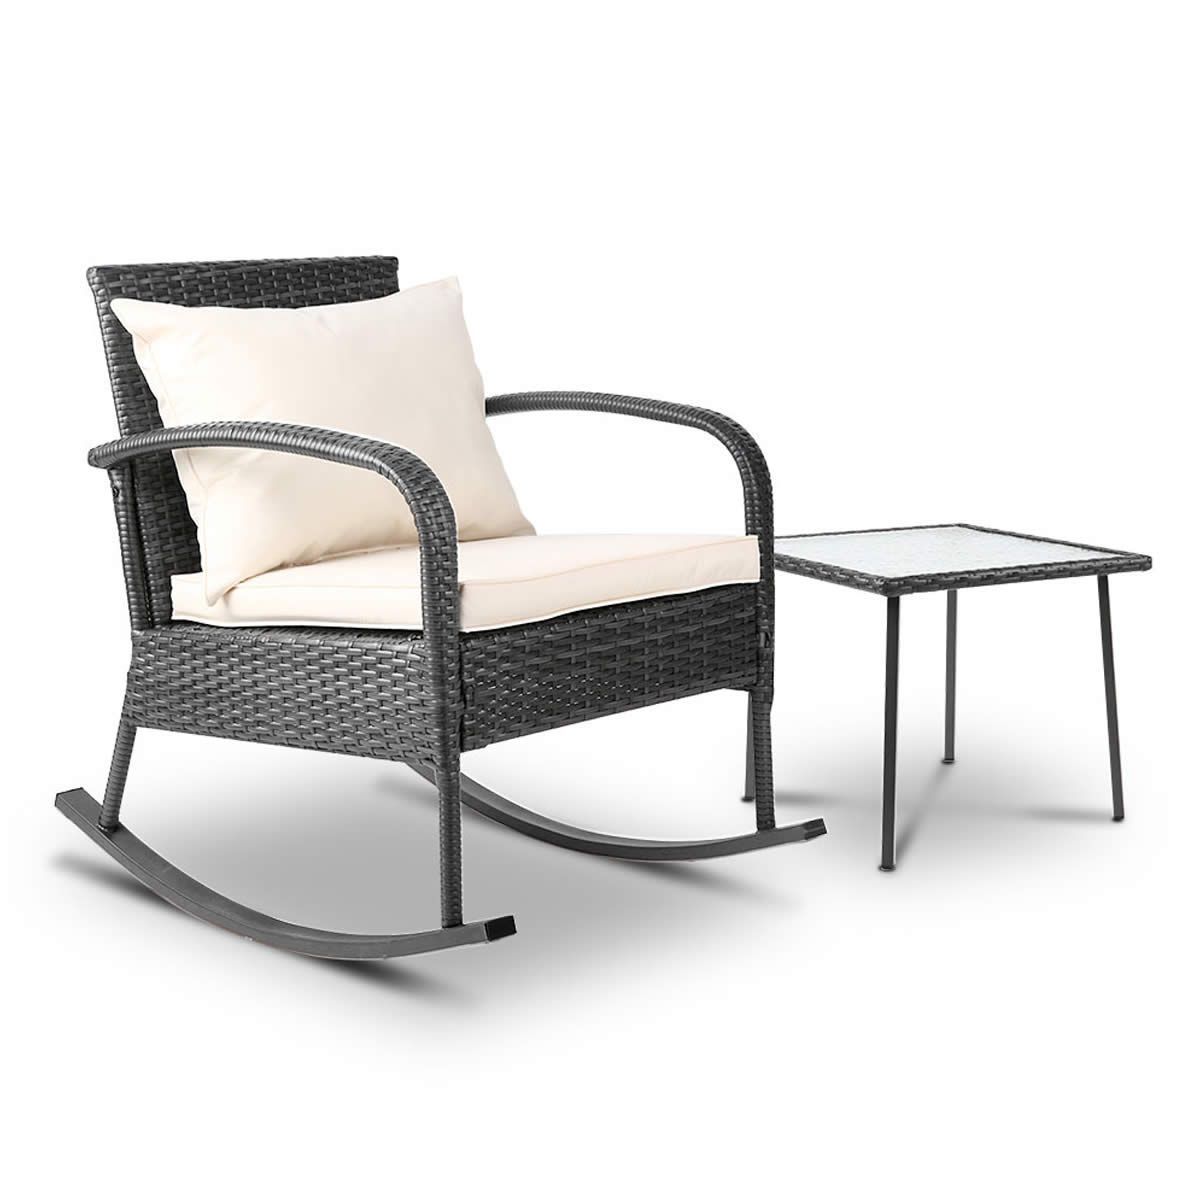 Outdoor Chair and Table Rocking Set Furniture - Grey